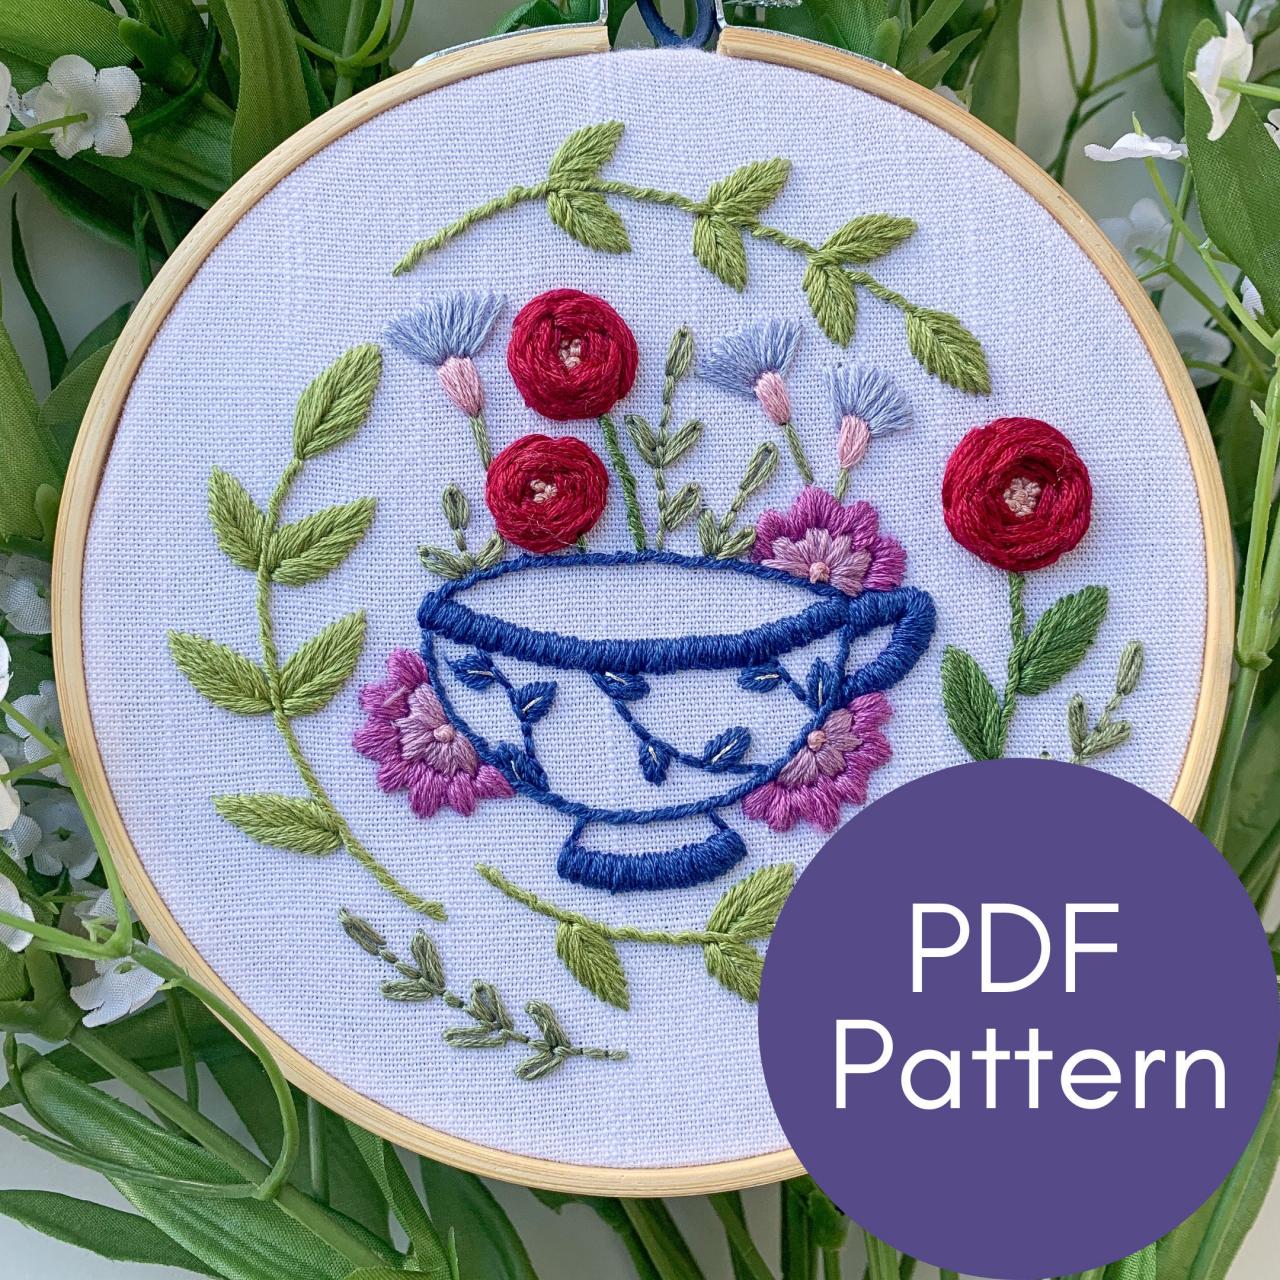 Teacup Hand Embroidery Pattern | Tea Party | Garden Party | DIY Embroidery | Modern Embroidery | Tea Time | Mother's Day Gift | Rose | Peony